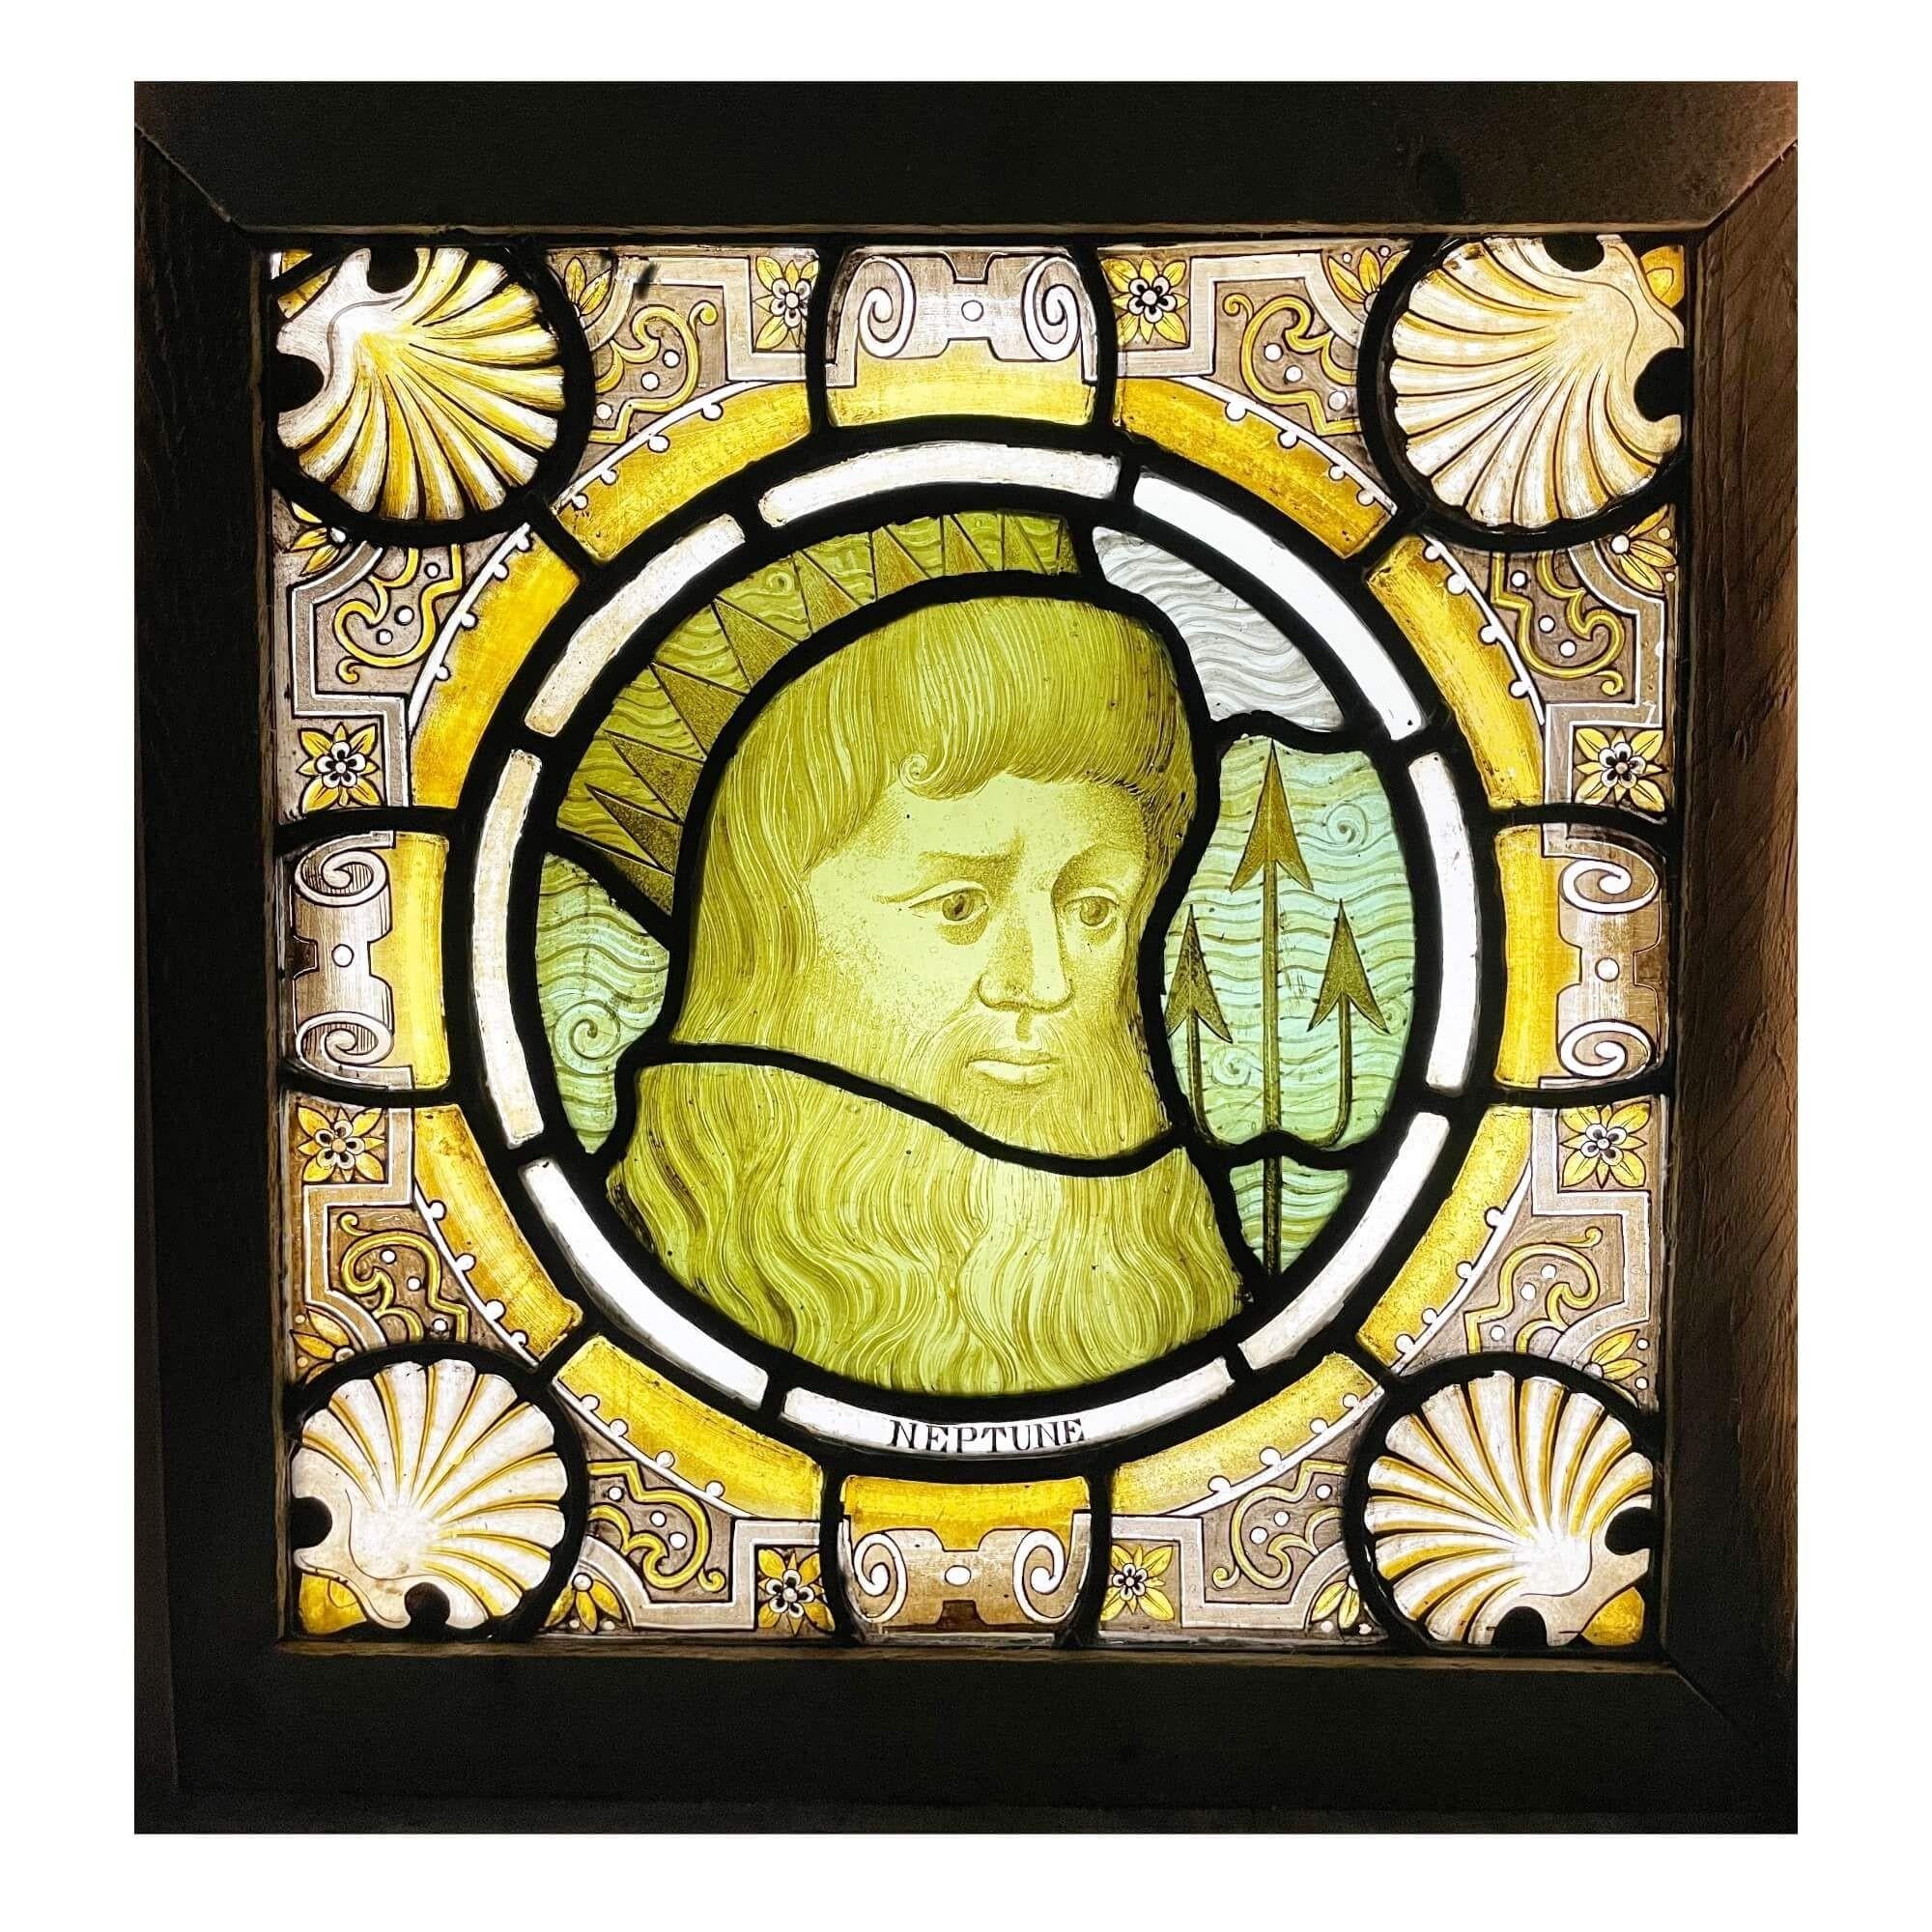 A late 19th century antique stained glass window panel depicting Neptune, God of water and sea, one of 3 similar we are selling depicting notable figures of Greek and Roman mythology.

This vibrant piece was previously owned by Seymour Stein - music